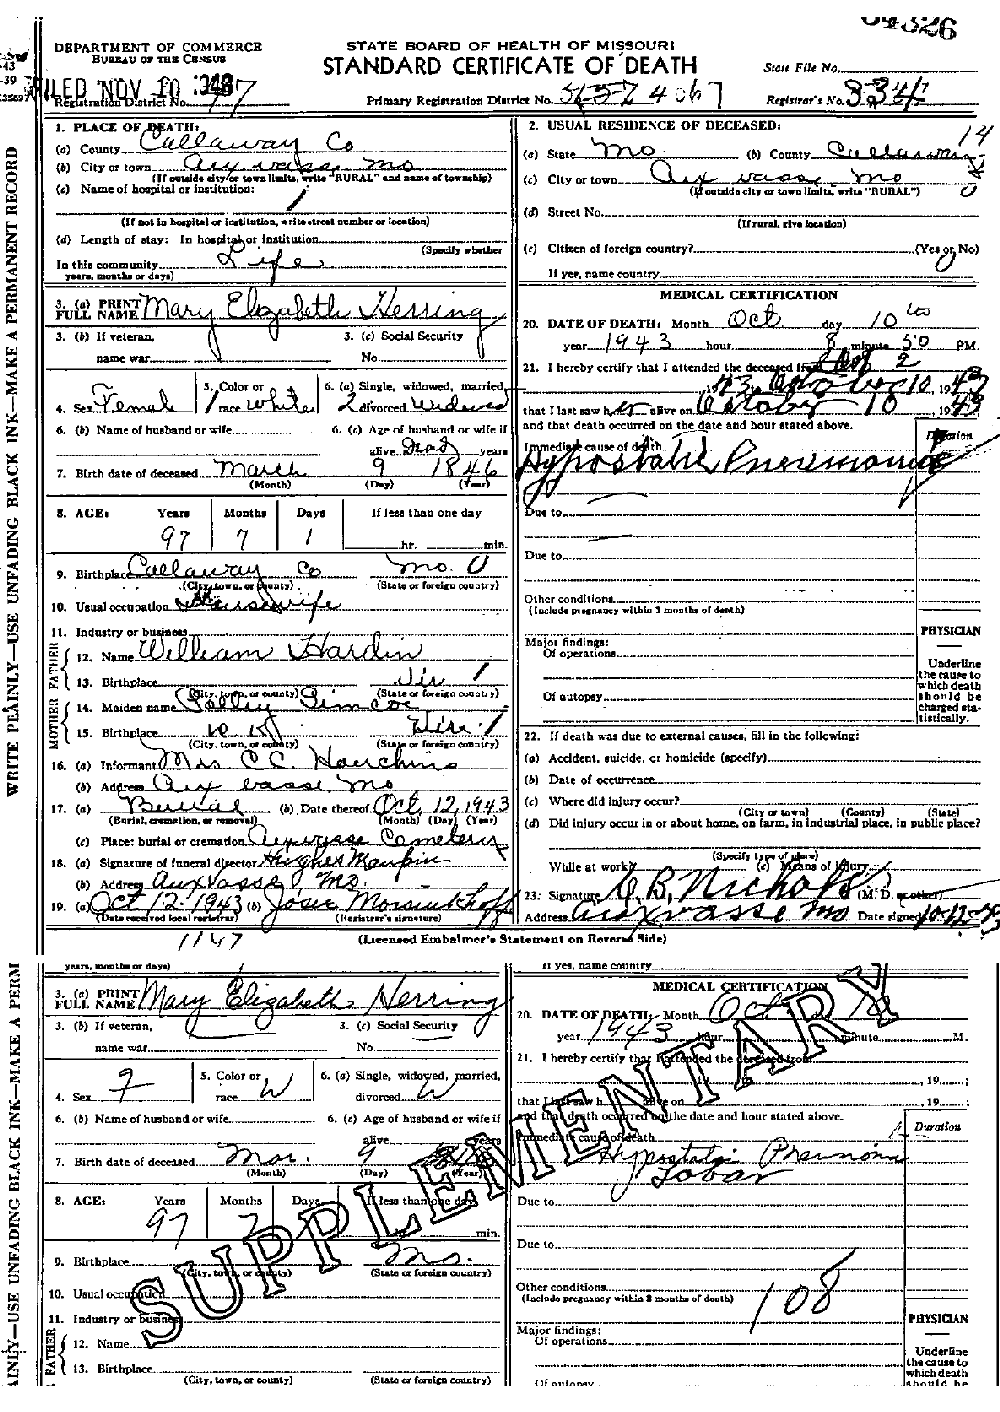 Death Certificate of Herring, Mary A. Hardin